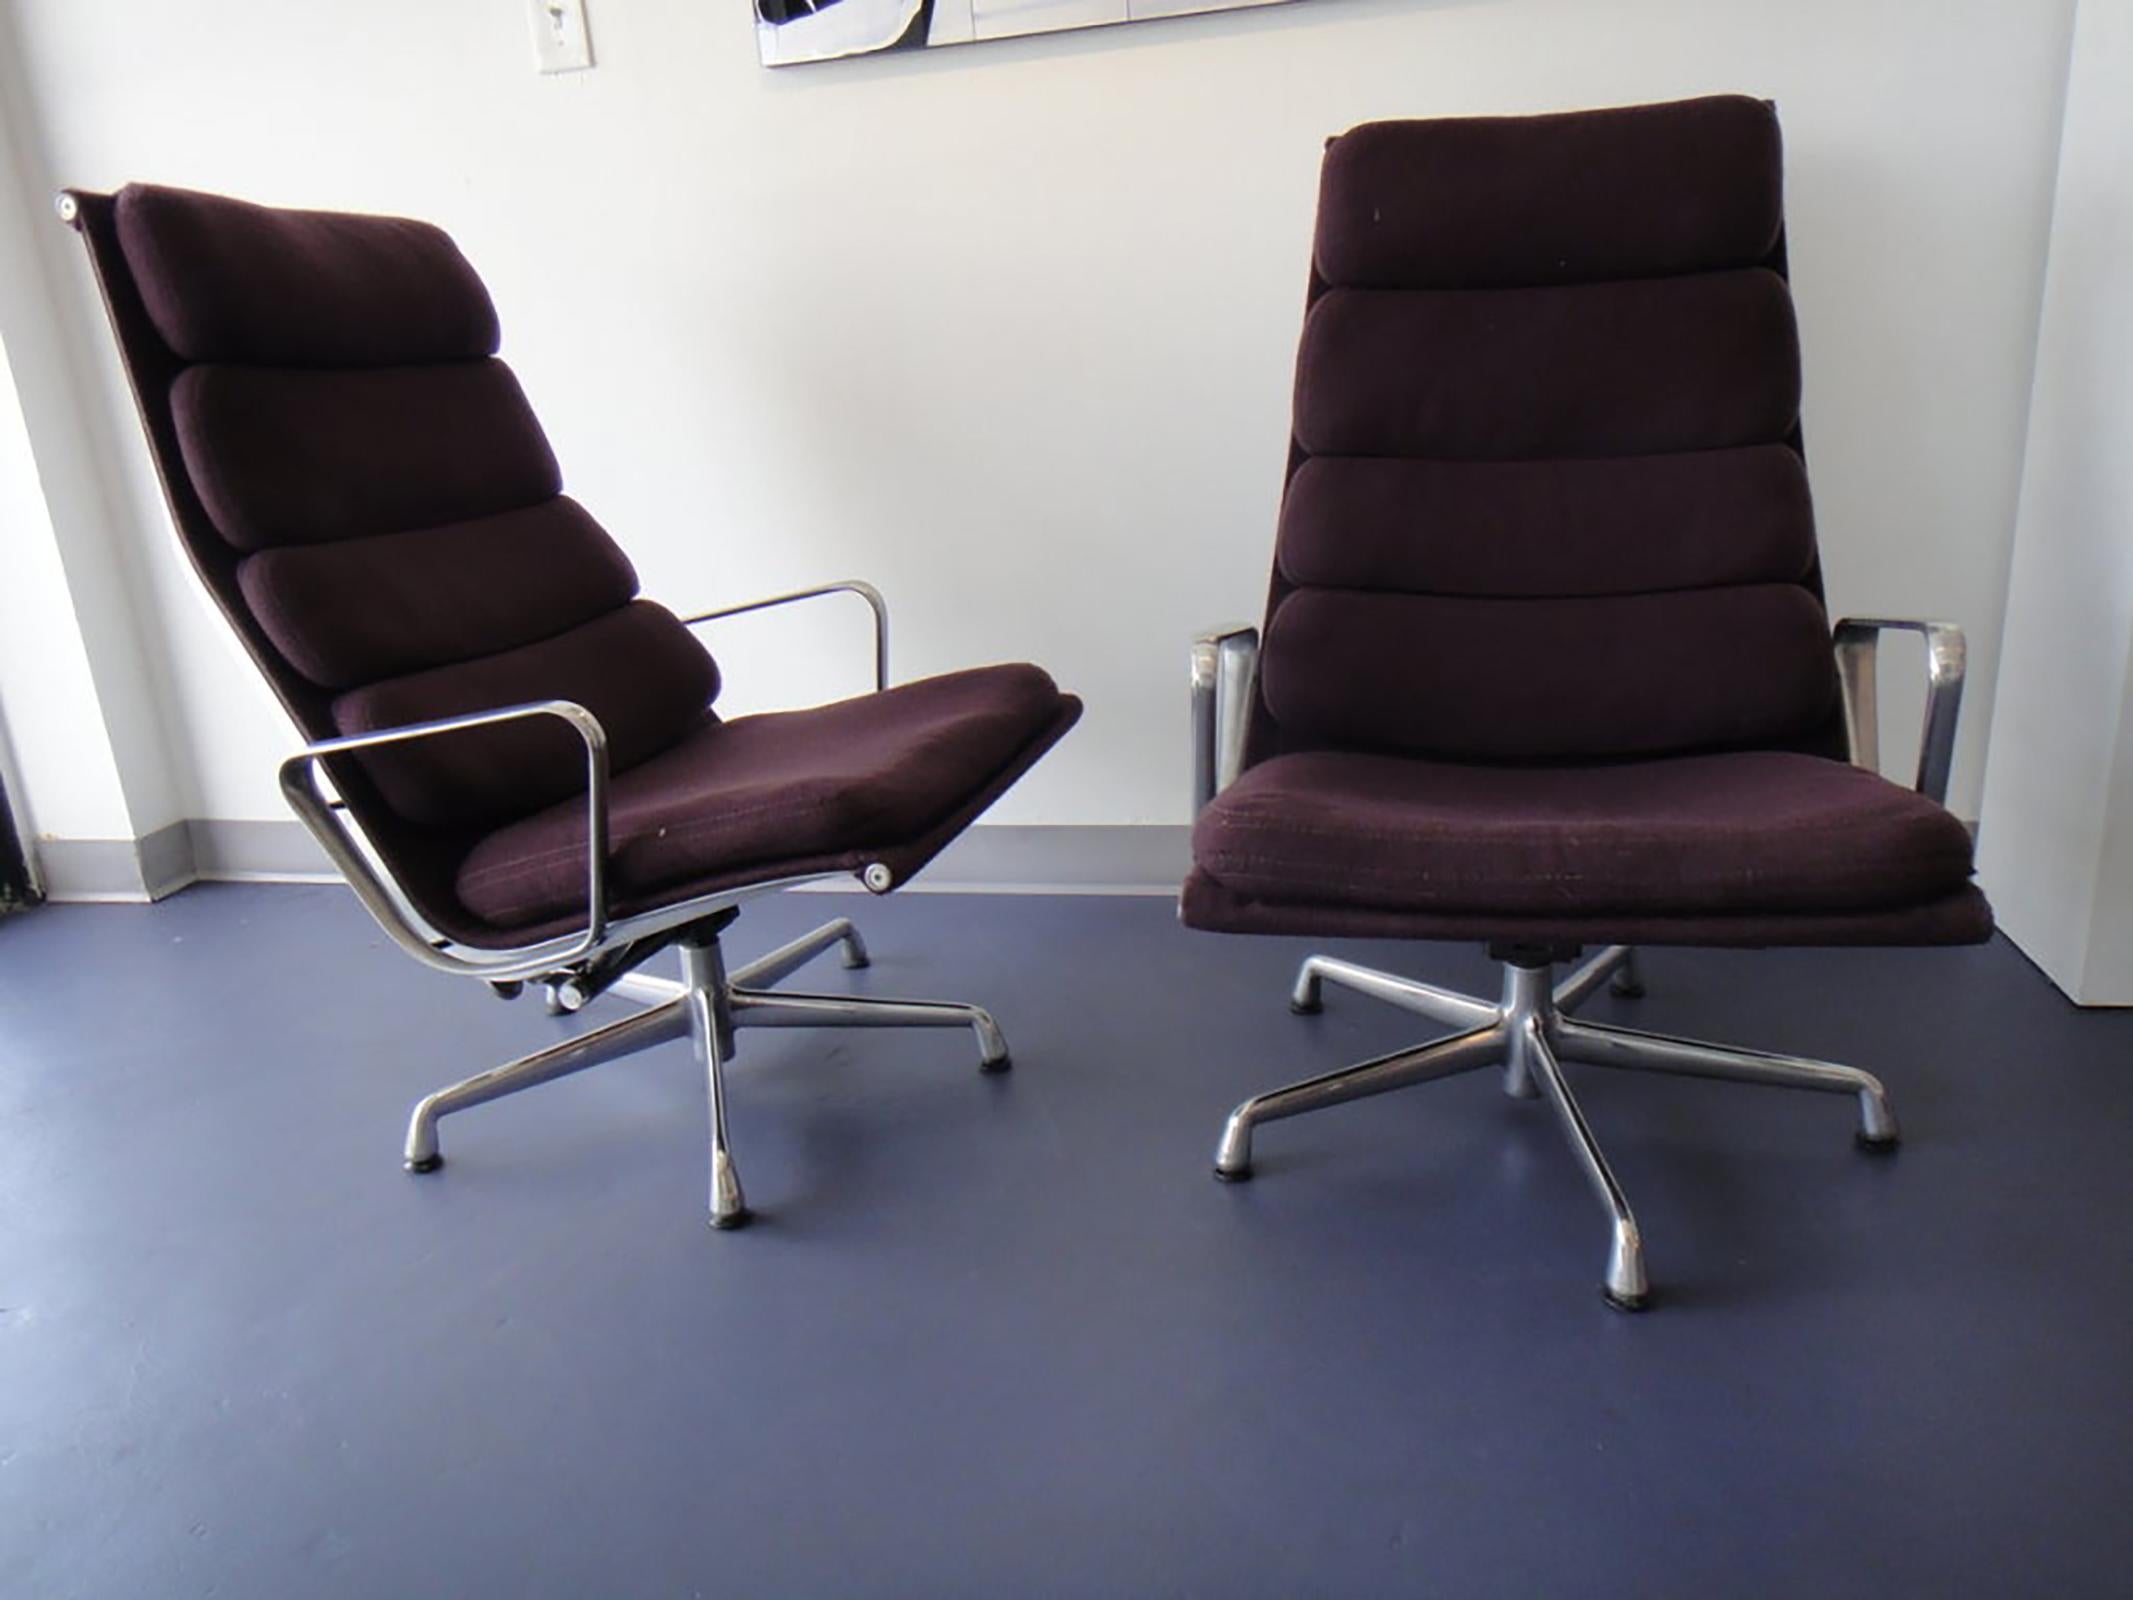 Pair of mid century modern soft Pad Management Lounge chairs from the Aluminium Group Collection designed by CHARLES &RAY EAMES and made by HERMAN MILLER .
Dark purple fabric with aluminium base & swivel/tilt mechanism